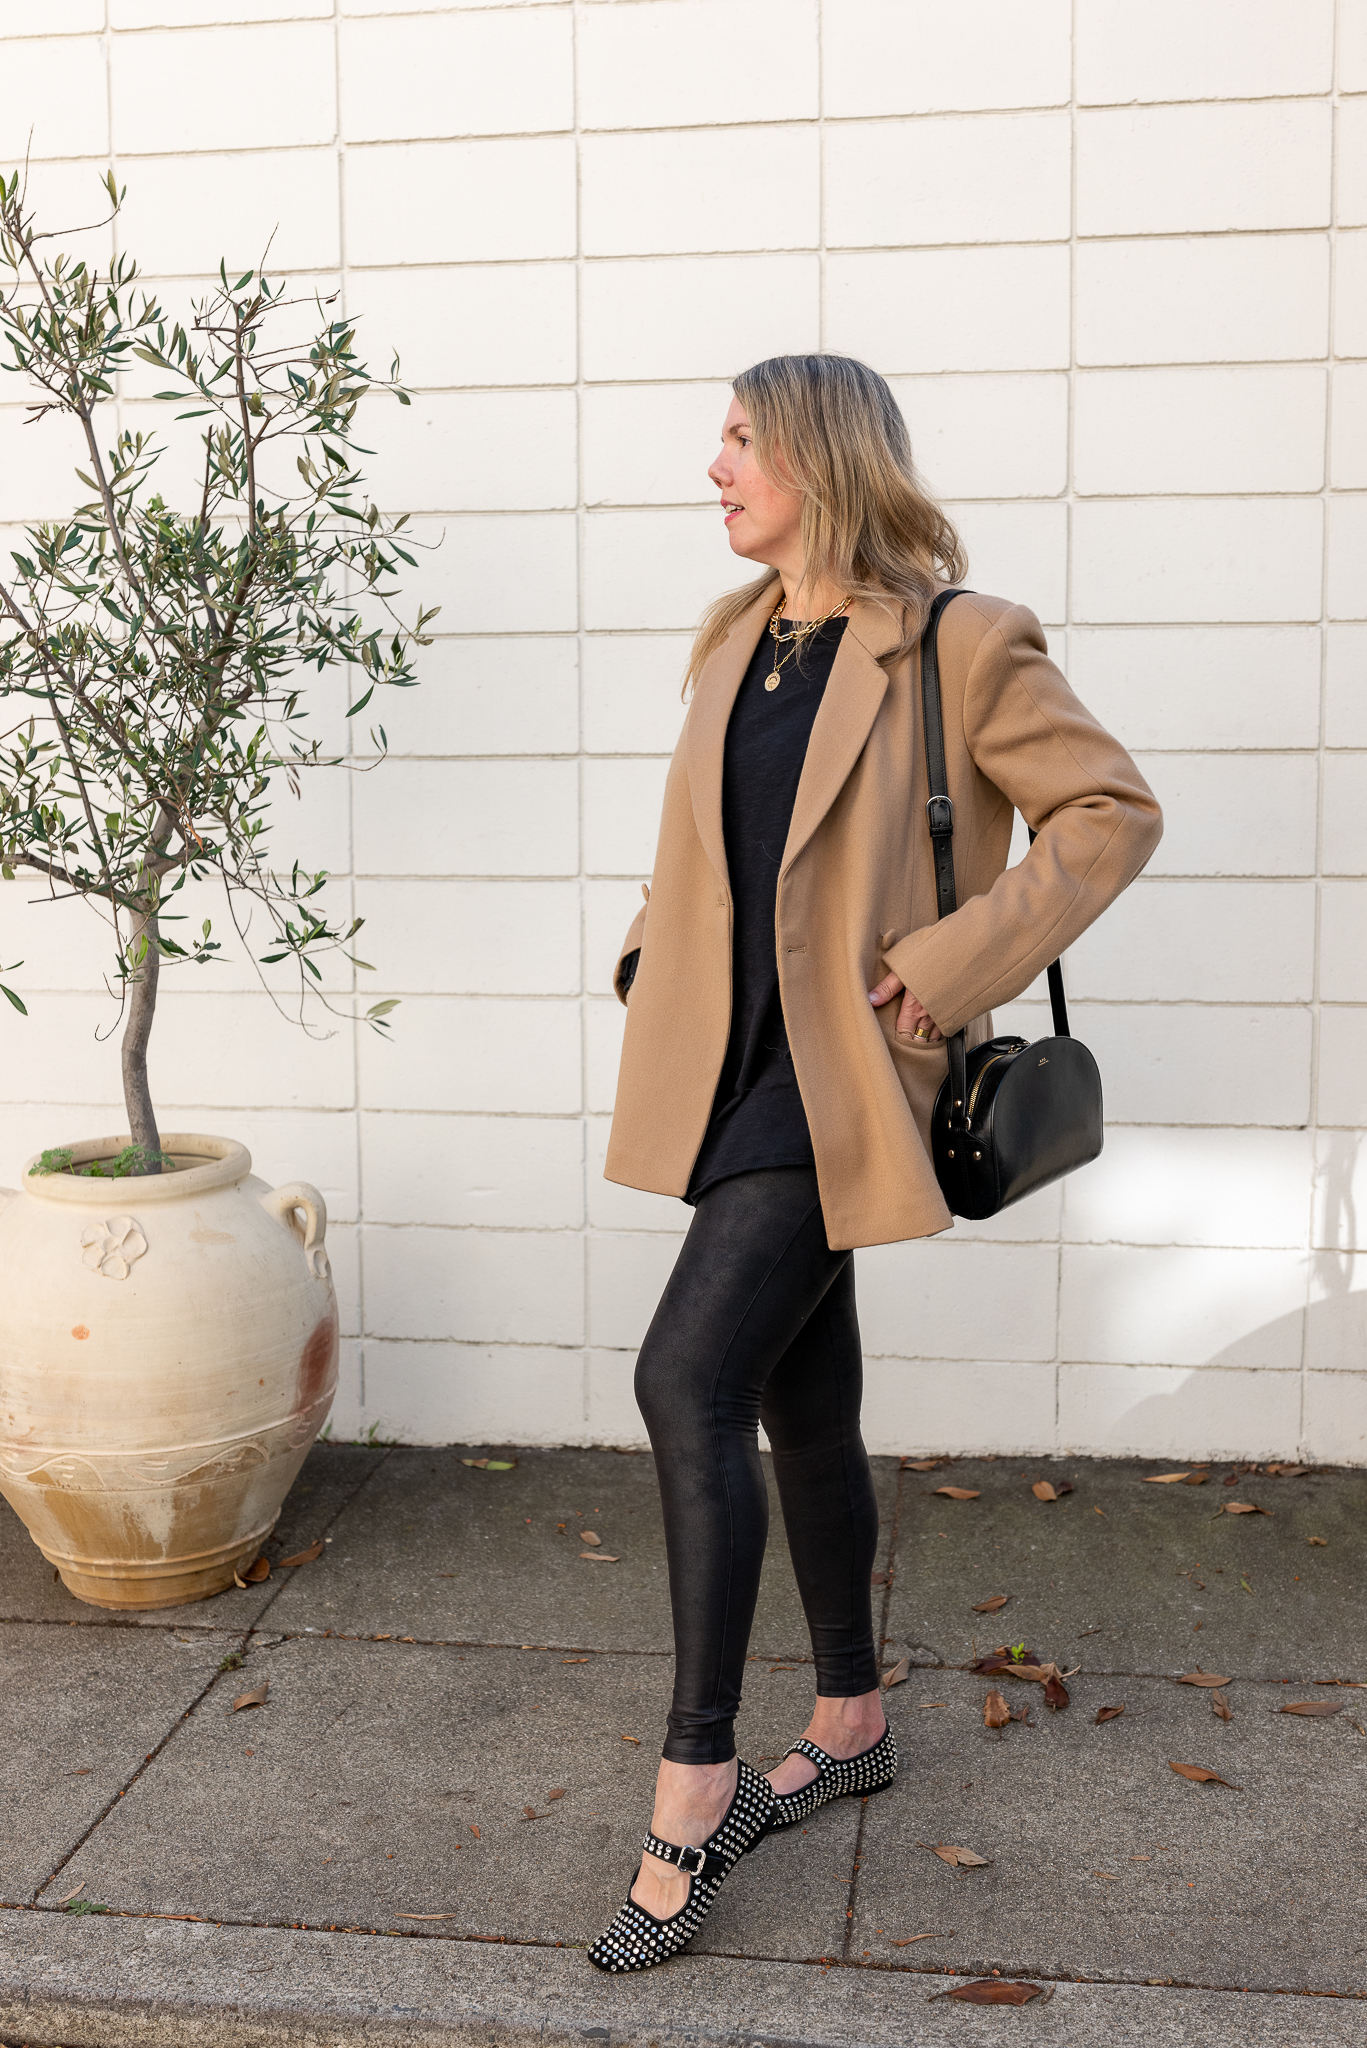 Spanx Faux Leather Leggings: Finally, An Honest Review and Dupes!